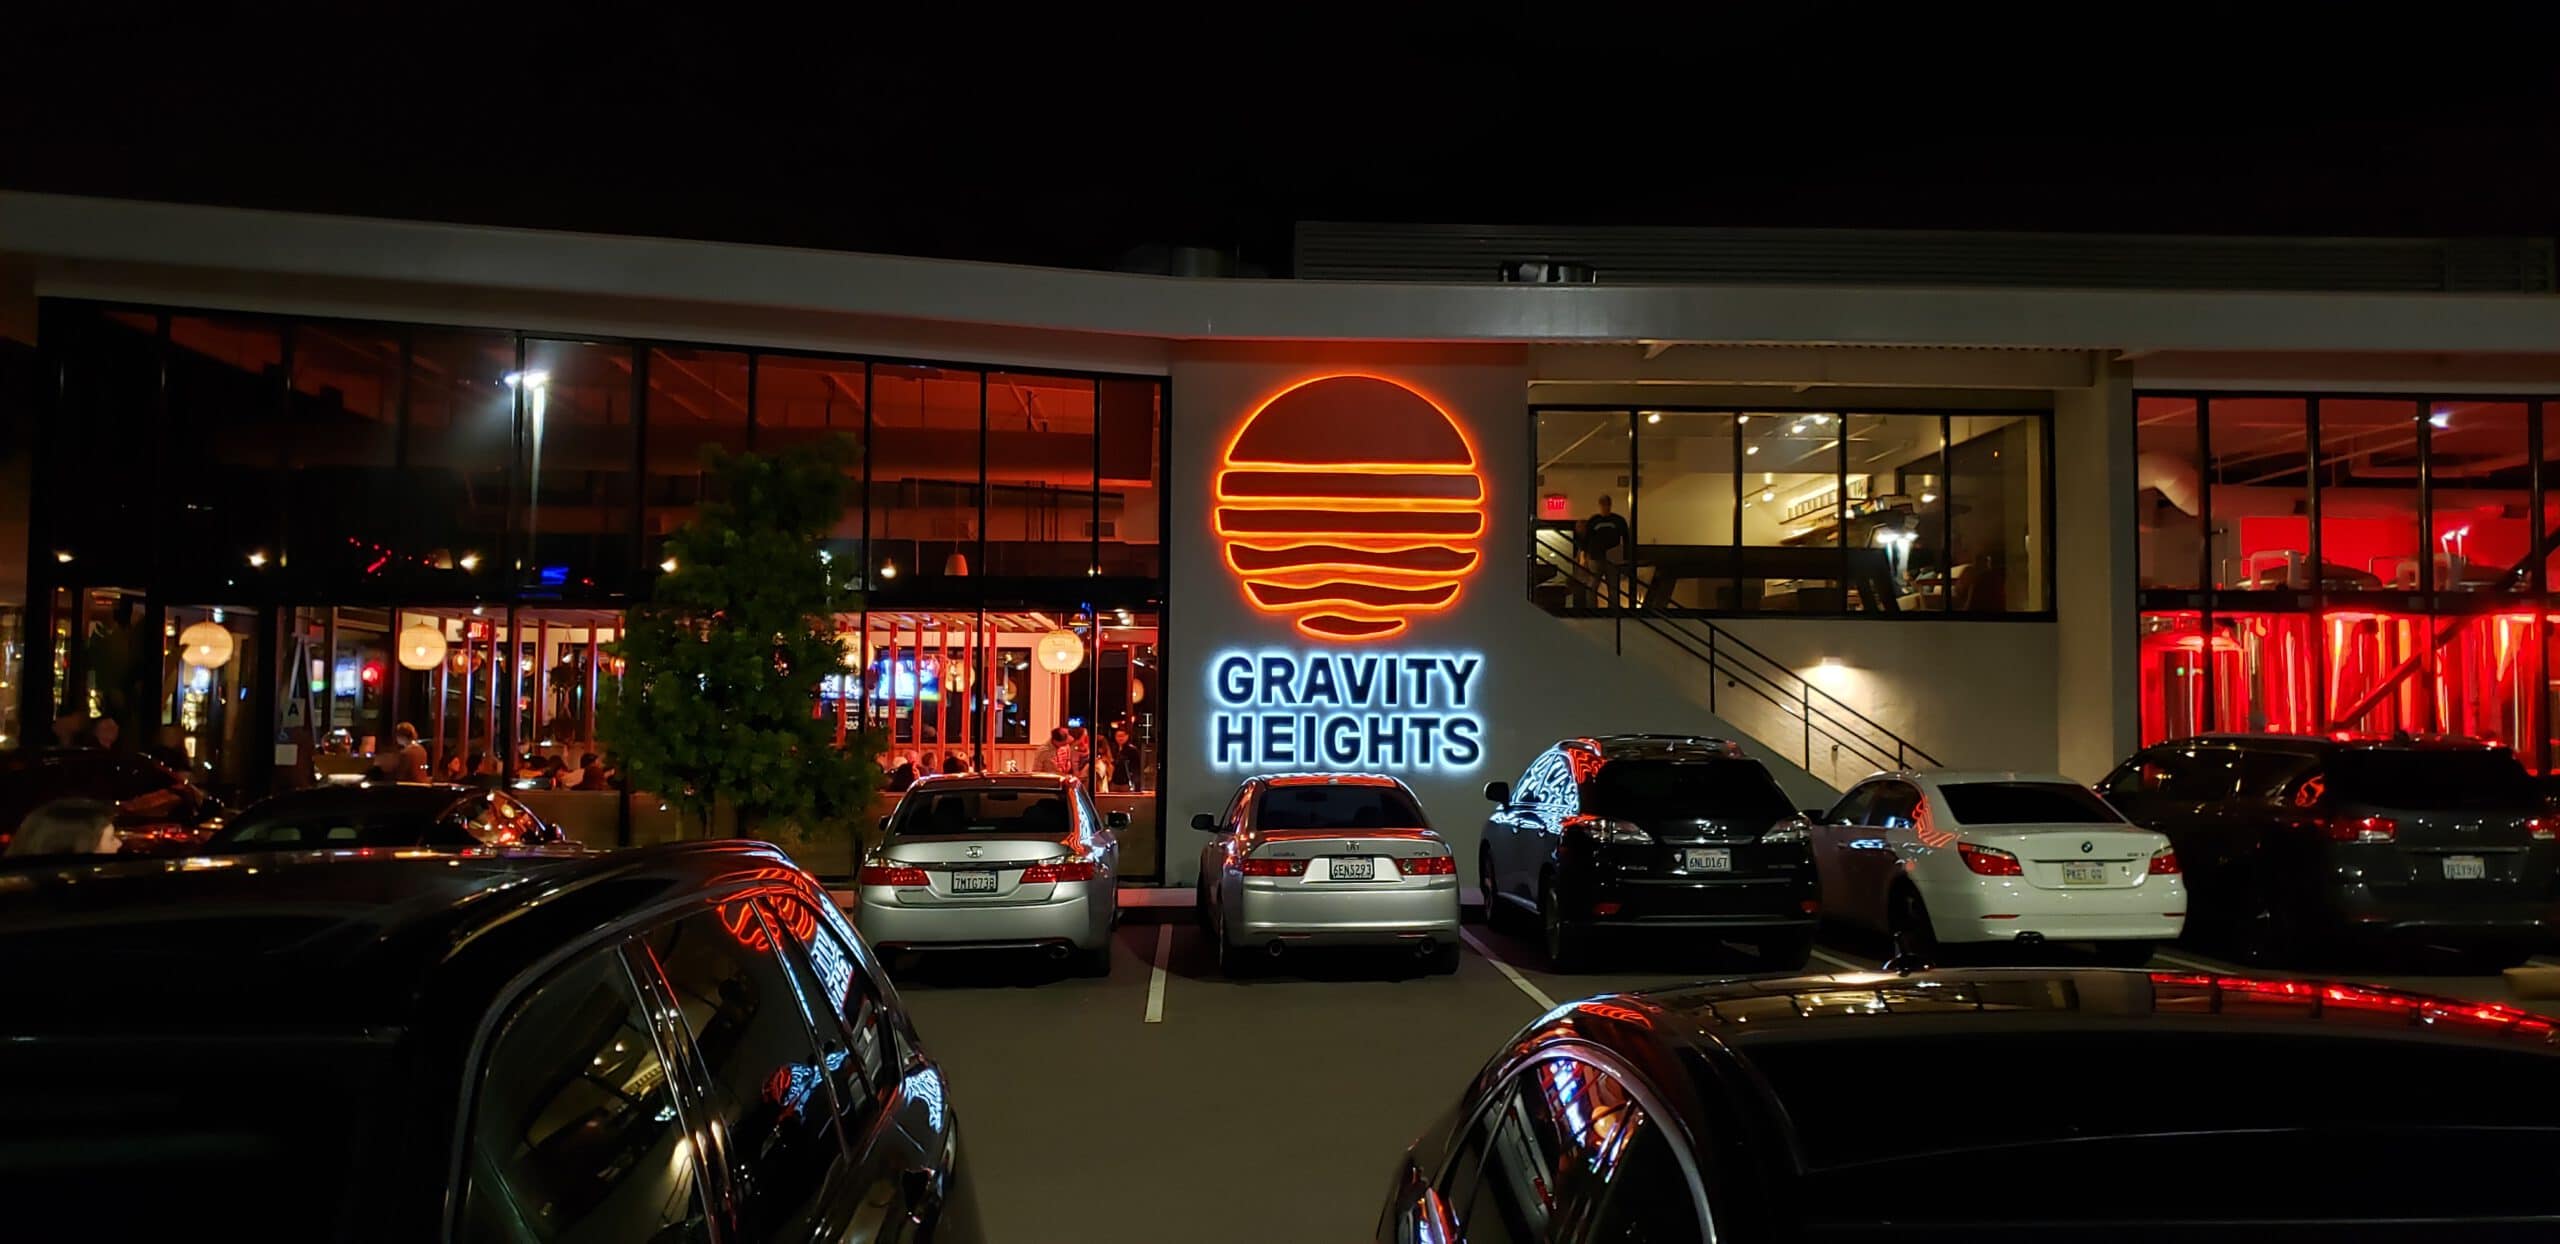 Gravity Heights Channel Letter Sign